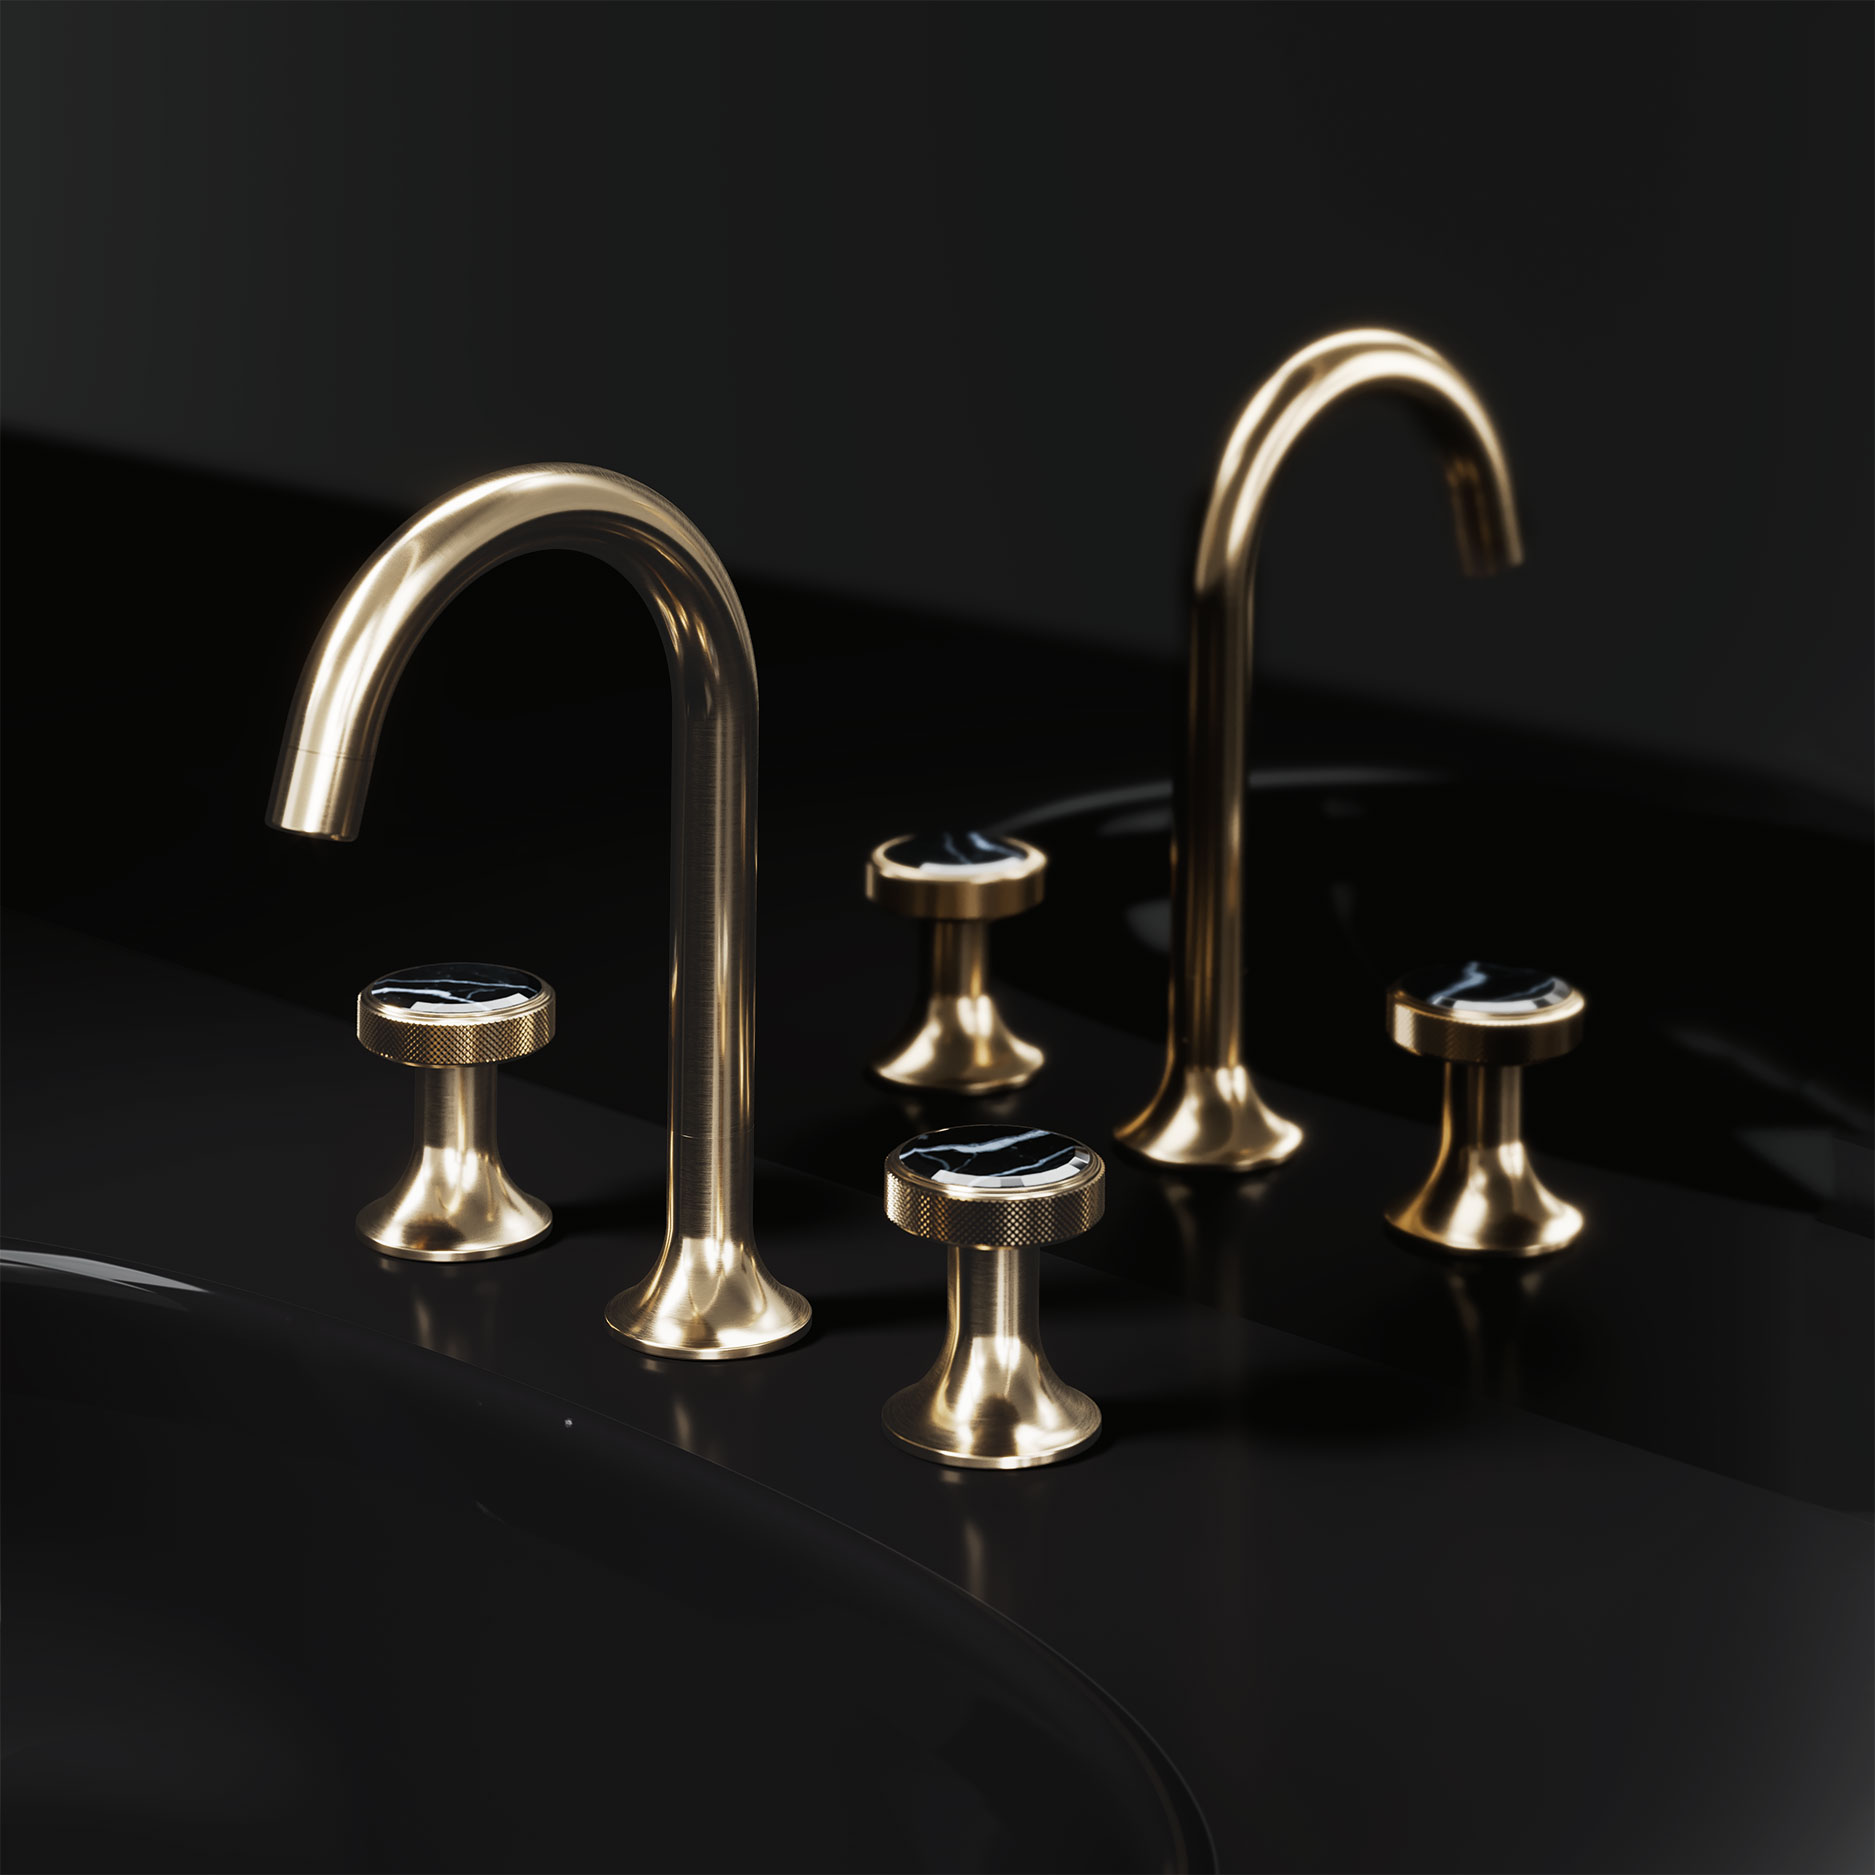 & - with – Jörger Avant-garde Bathroom Fittings moments shine Luxury glamorous Accessories and Exquisite